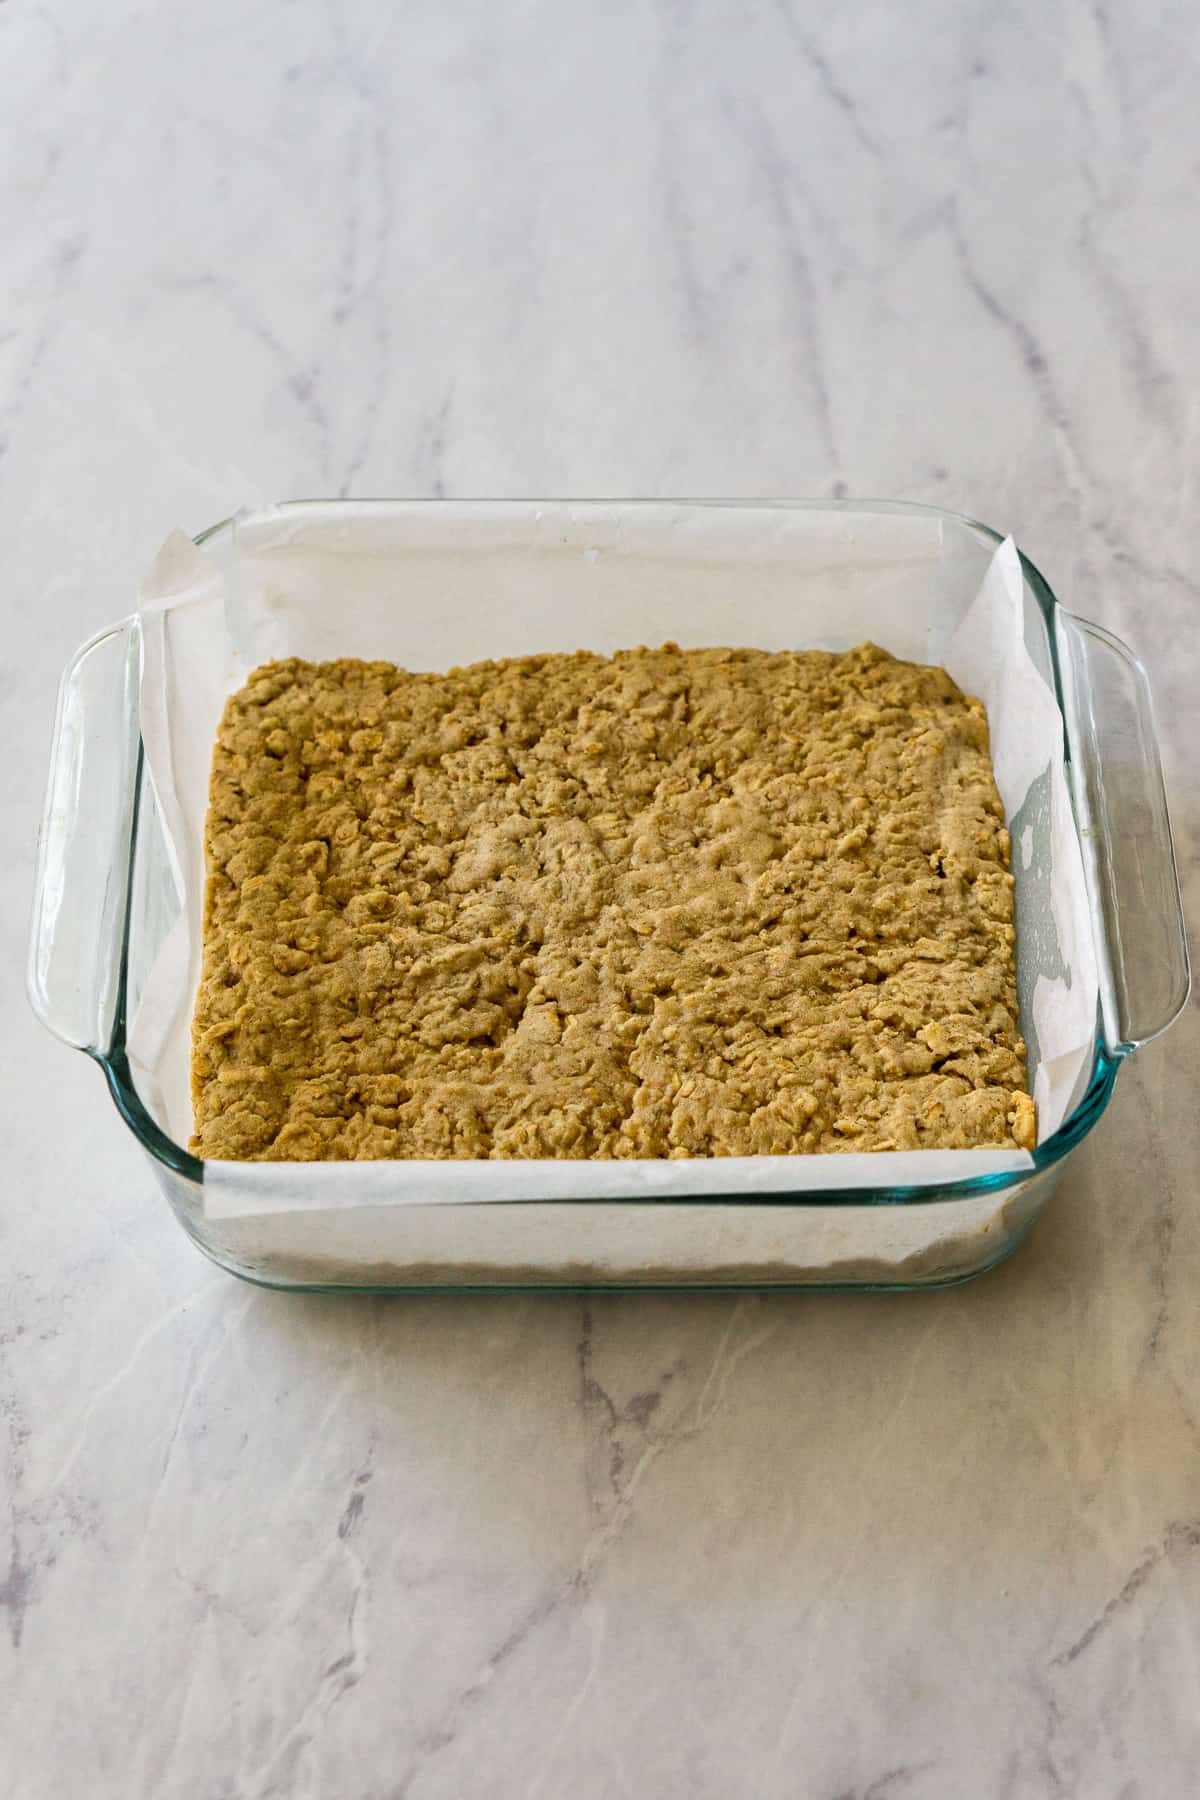 A baked cookie base in an 8x8 inch glass pan lined with parchment paper.